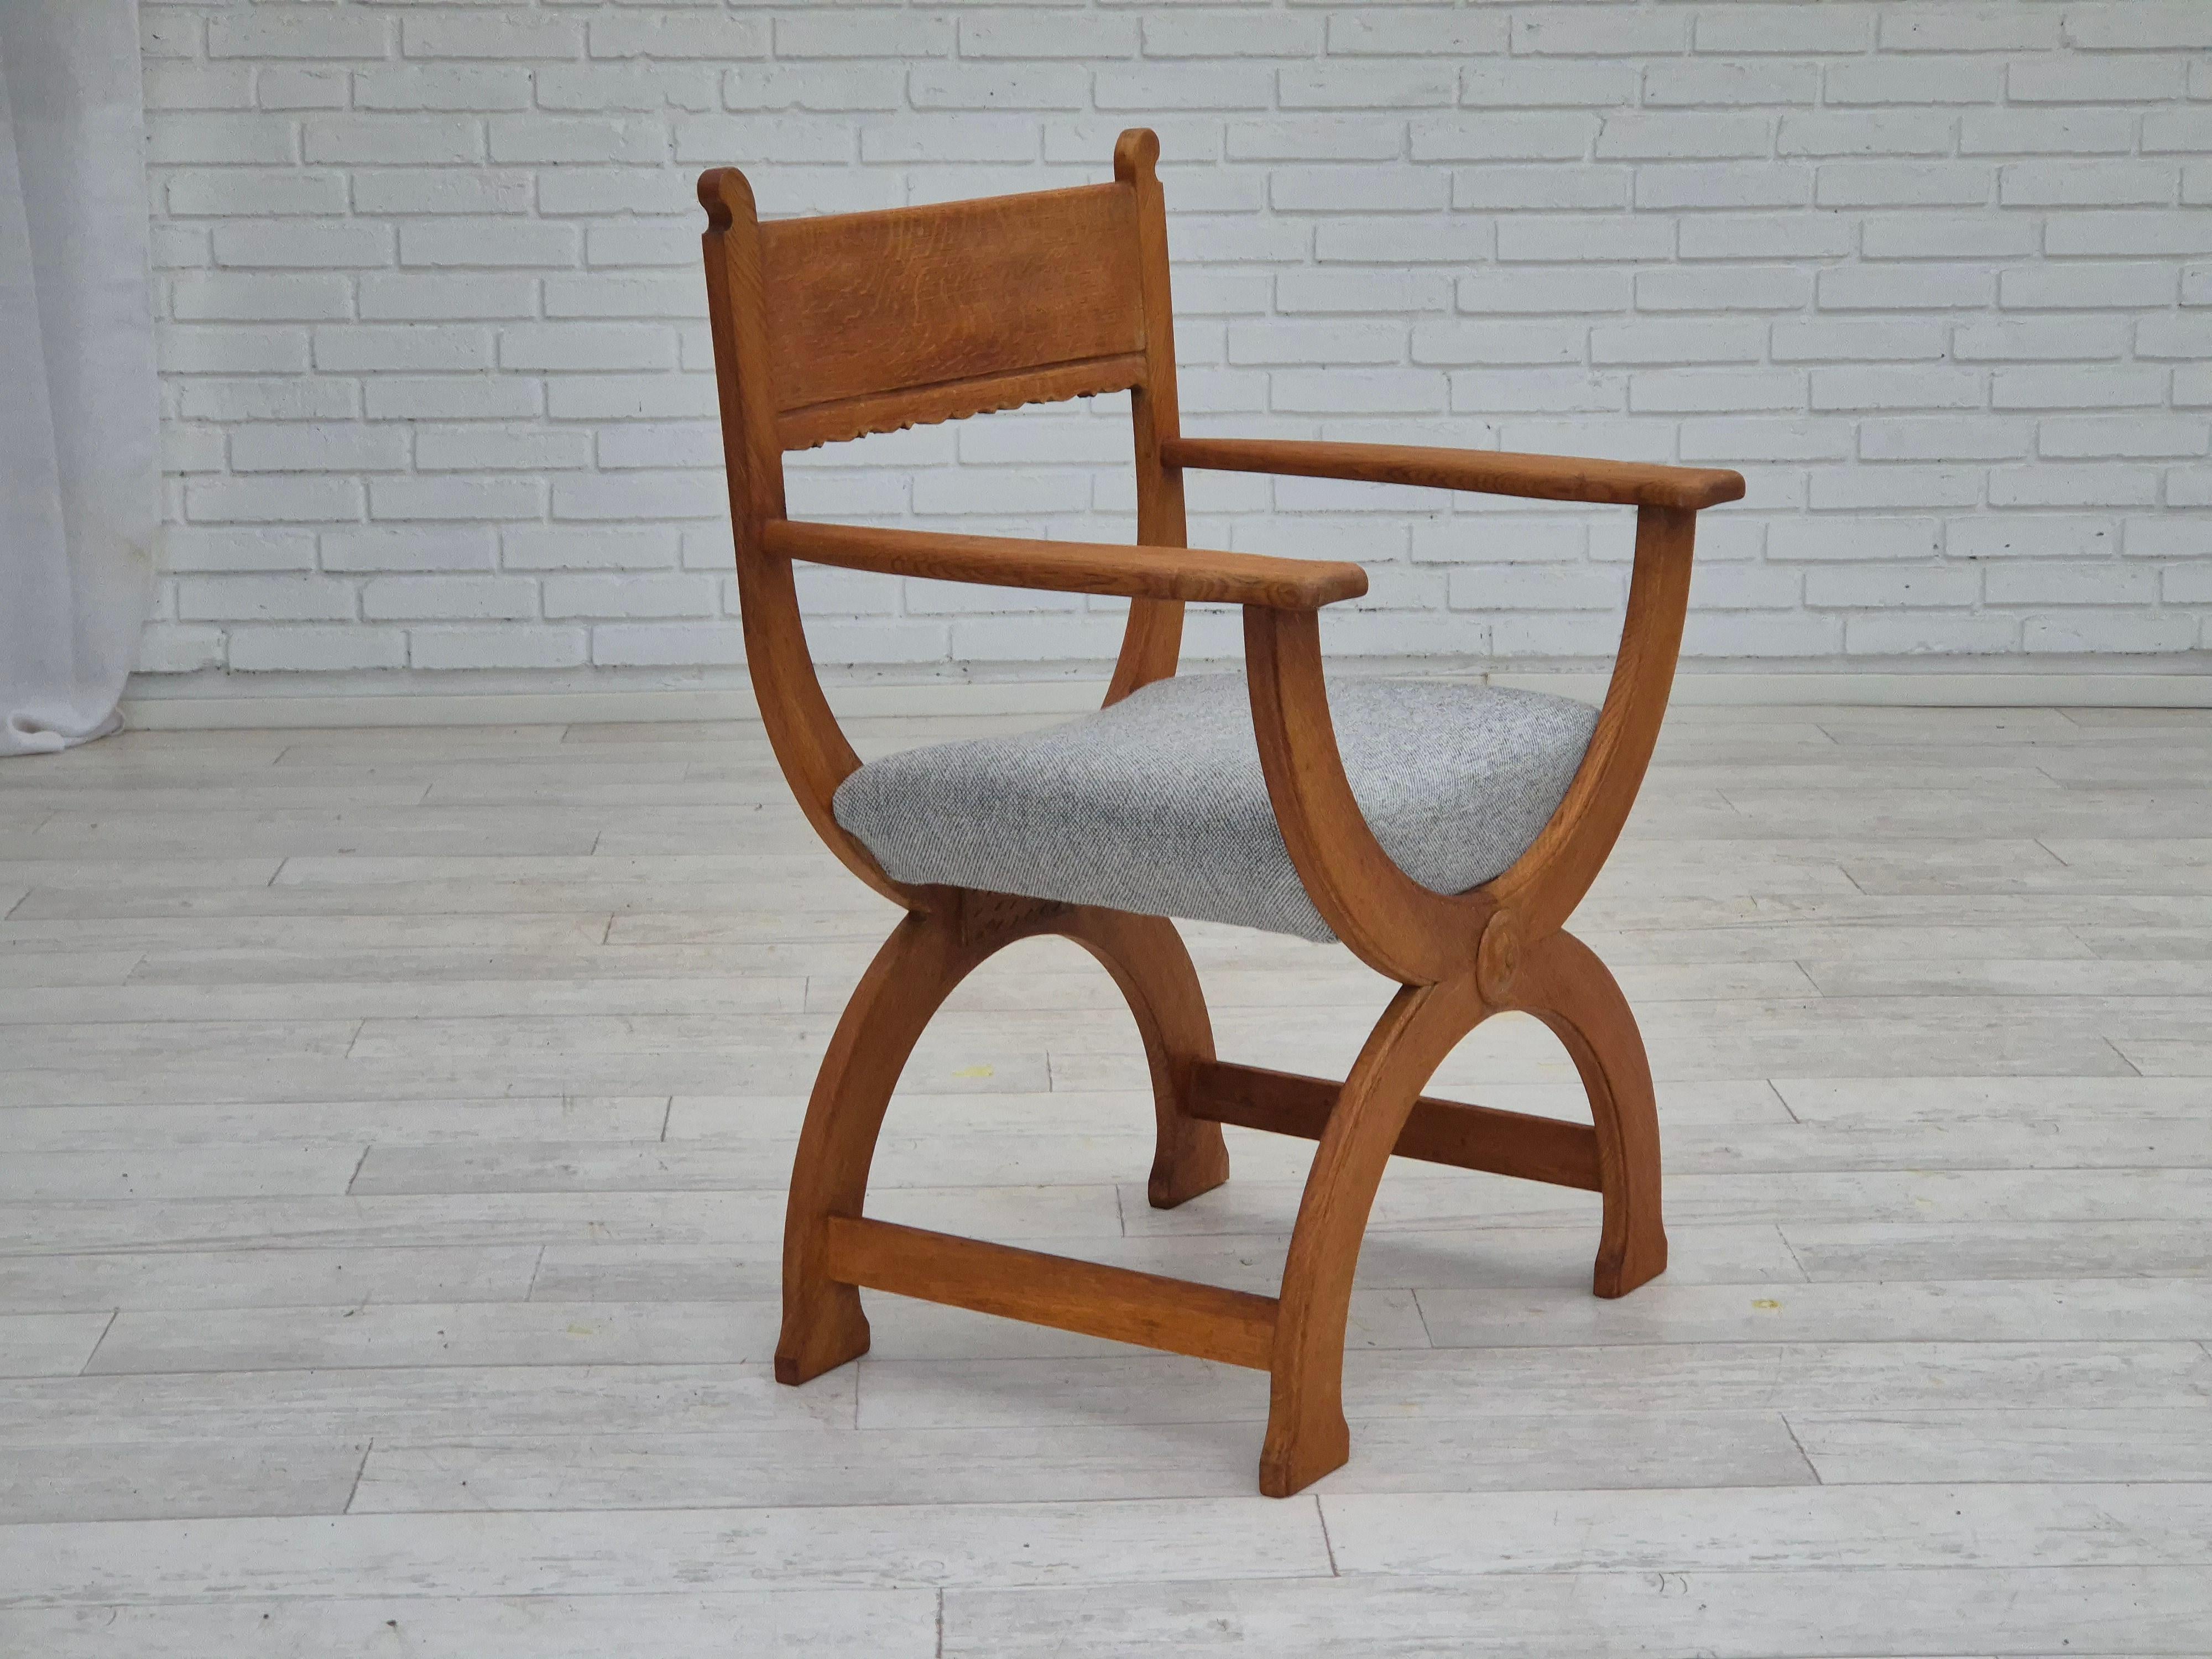 1960s, Danish armchair in solid waxed oak wood. New reupholstered in quality KVADRAT furniture wool Hallingdal. Wood renewed. Made by Danish furniture manufacturer in about 1960s. Reupholstered by craftsman.